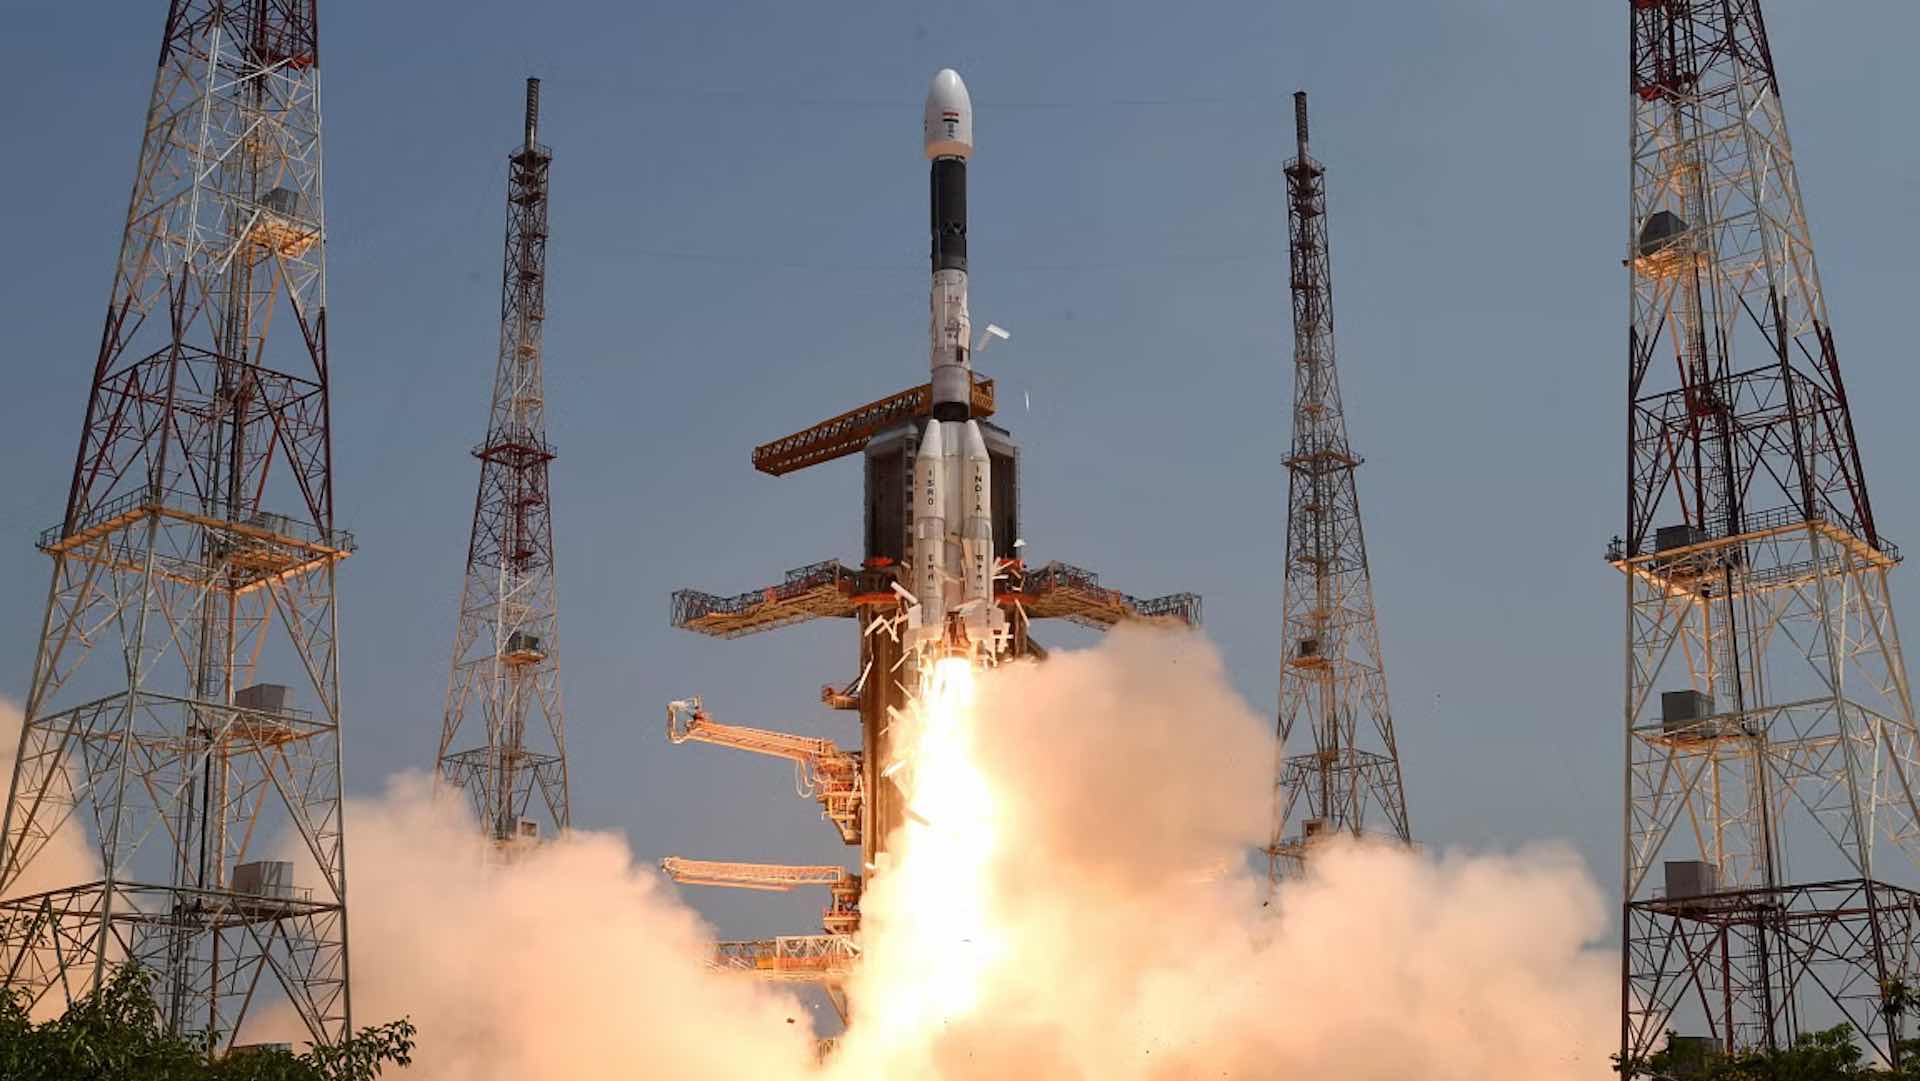 India’s mastery in space: ISRO's successful launch of Cartosat-3 satellite